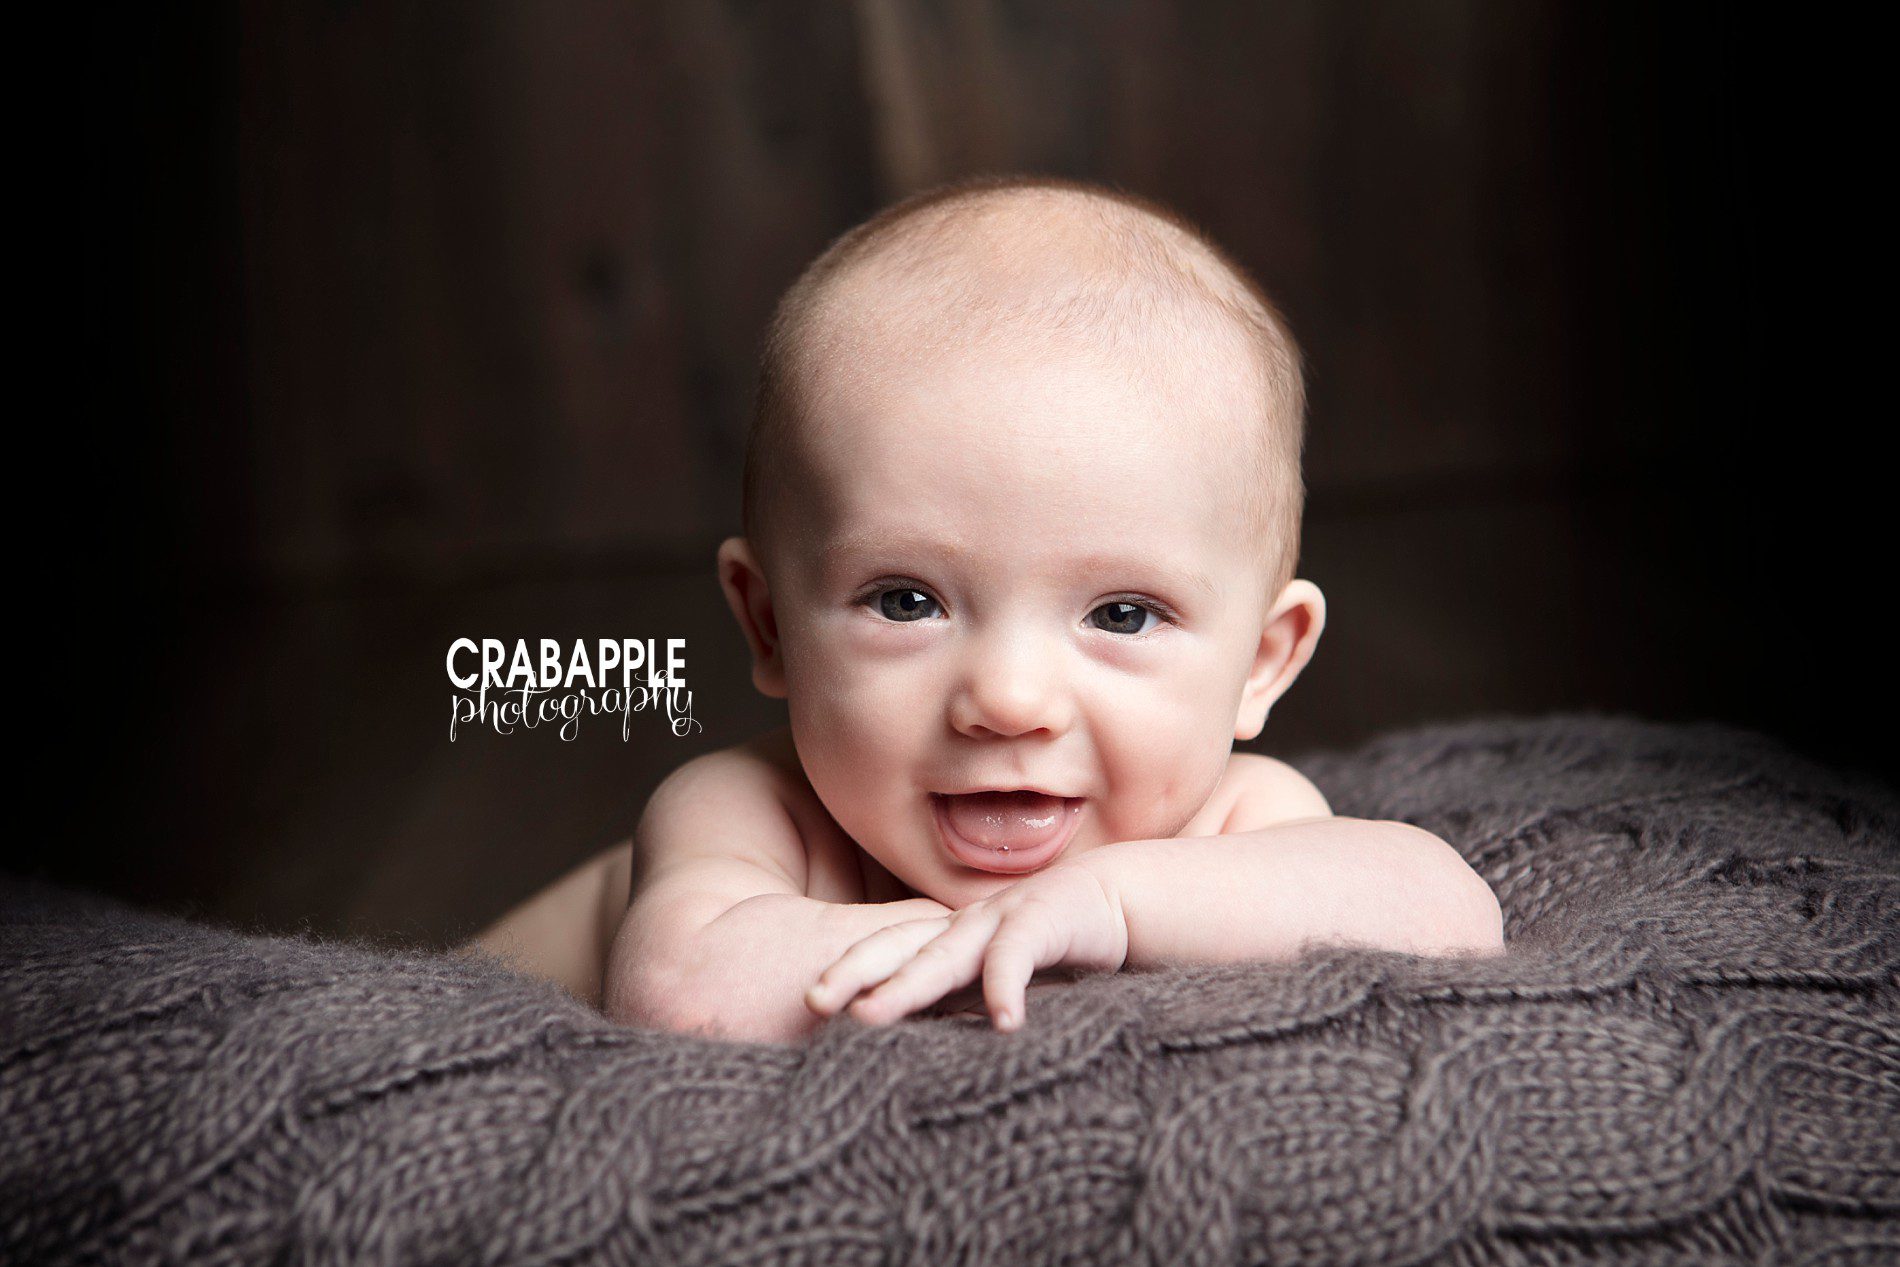 haverhill baby and child photos